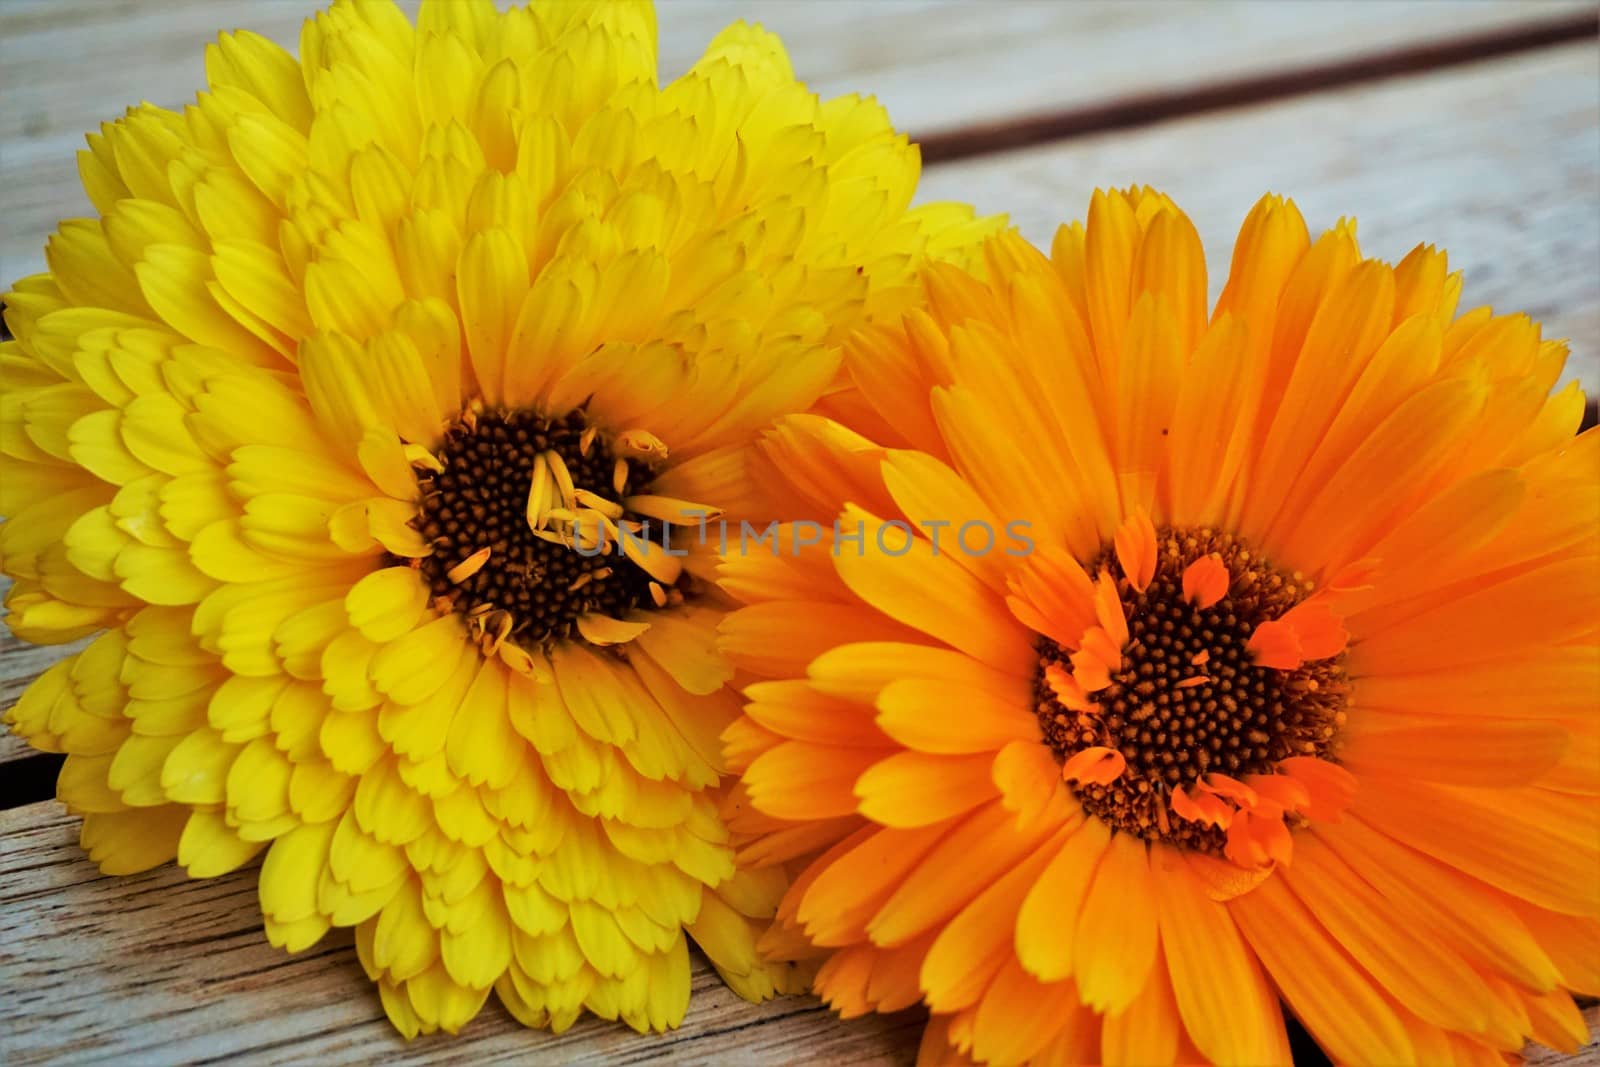 Orange and yellow Calendula blossom on wooden table by pisces2386